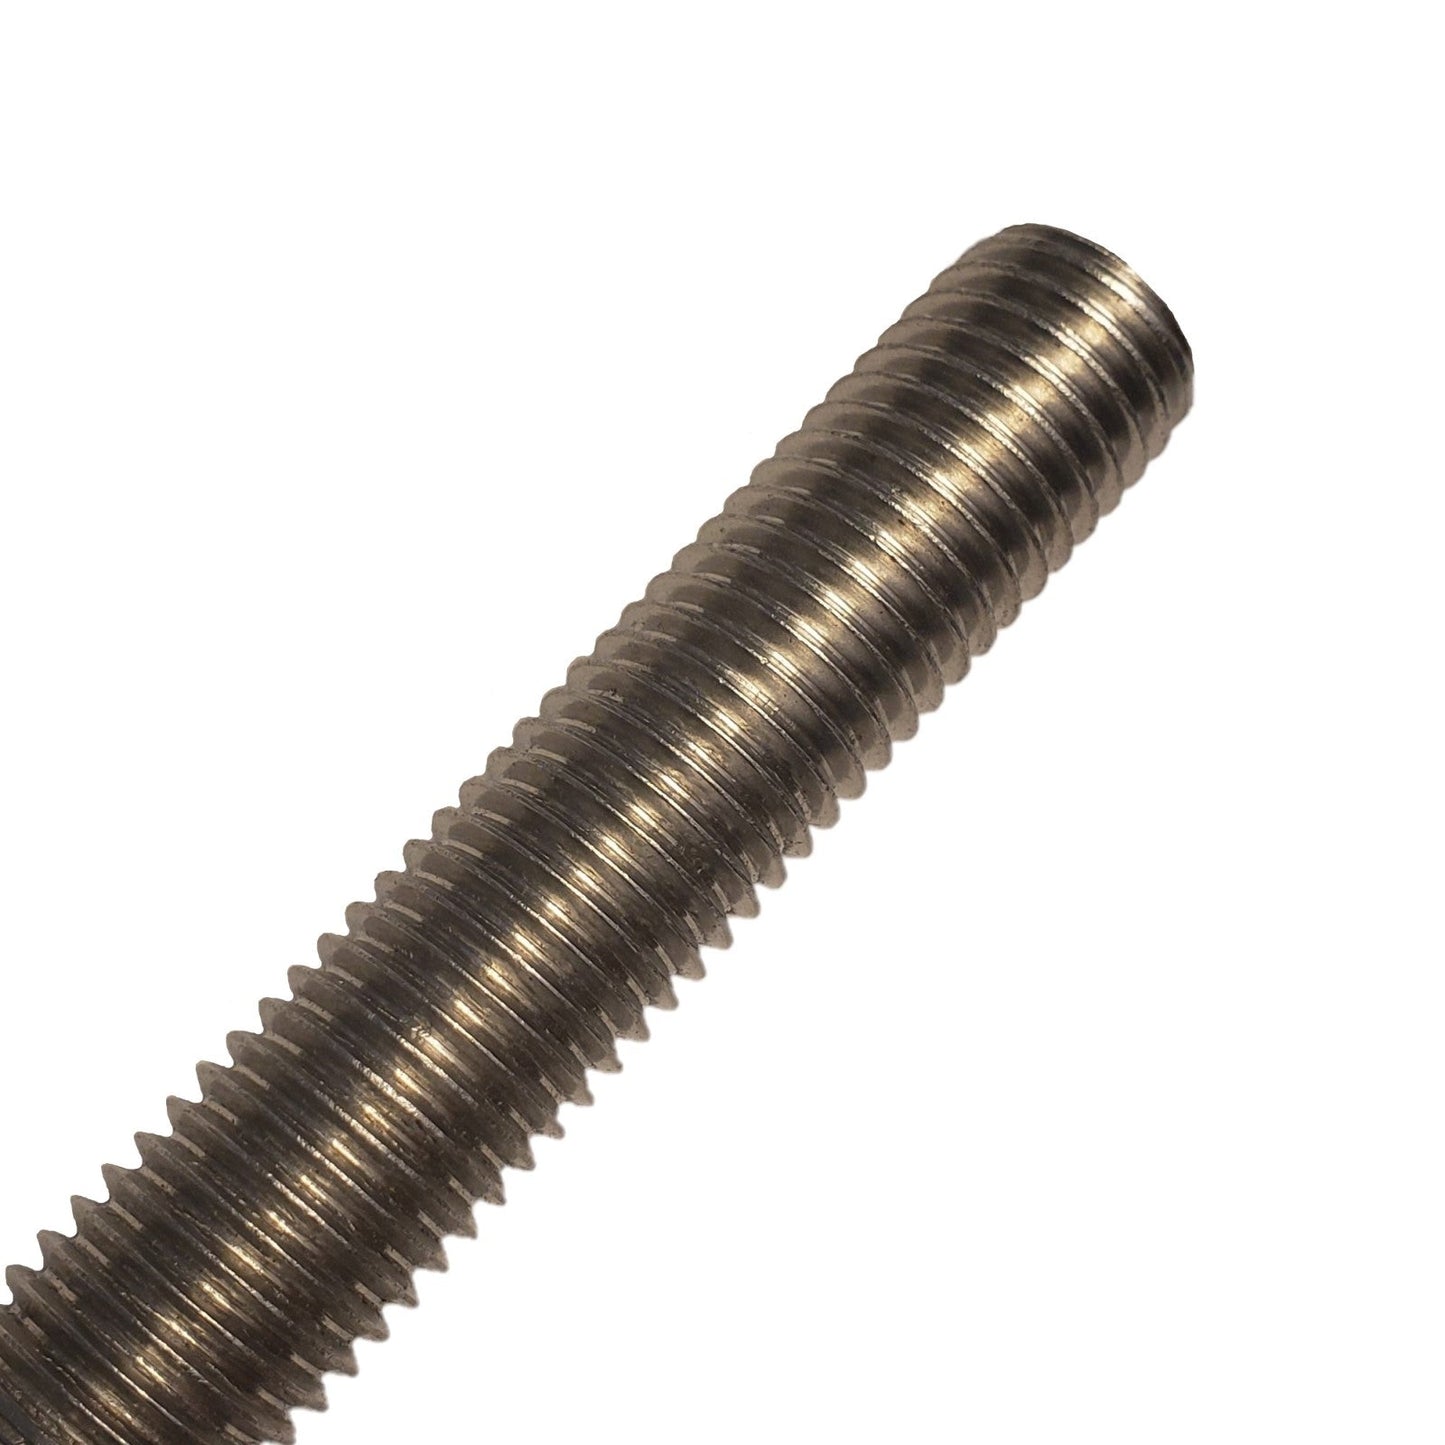 7/8"-9 x 4' 316 Stainless Threaded Rod - Made In USA